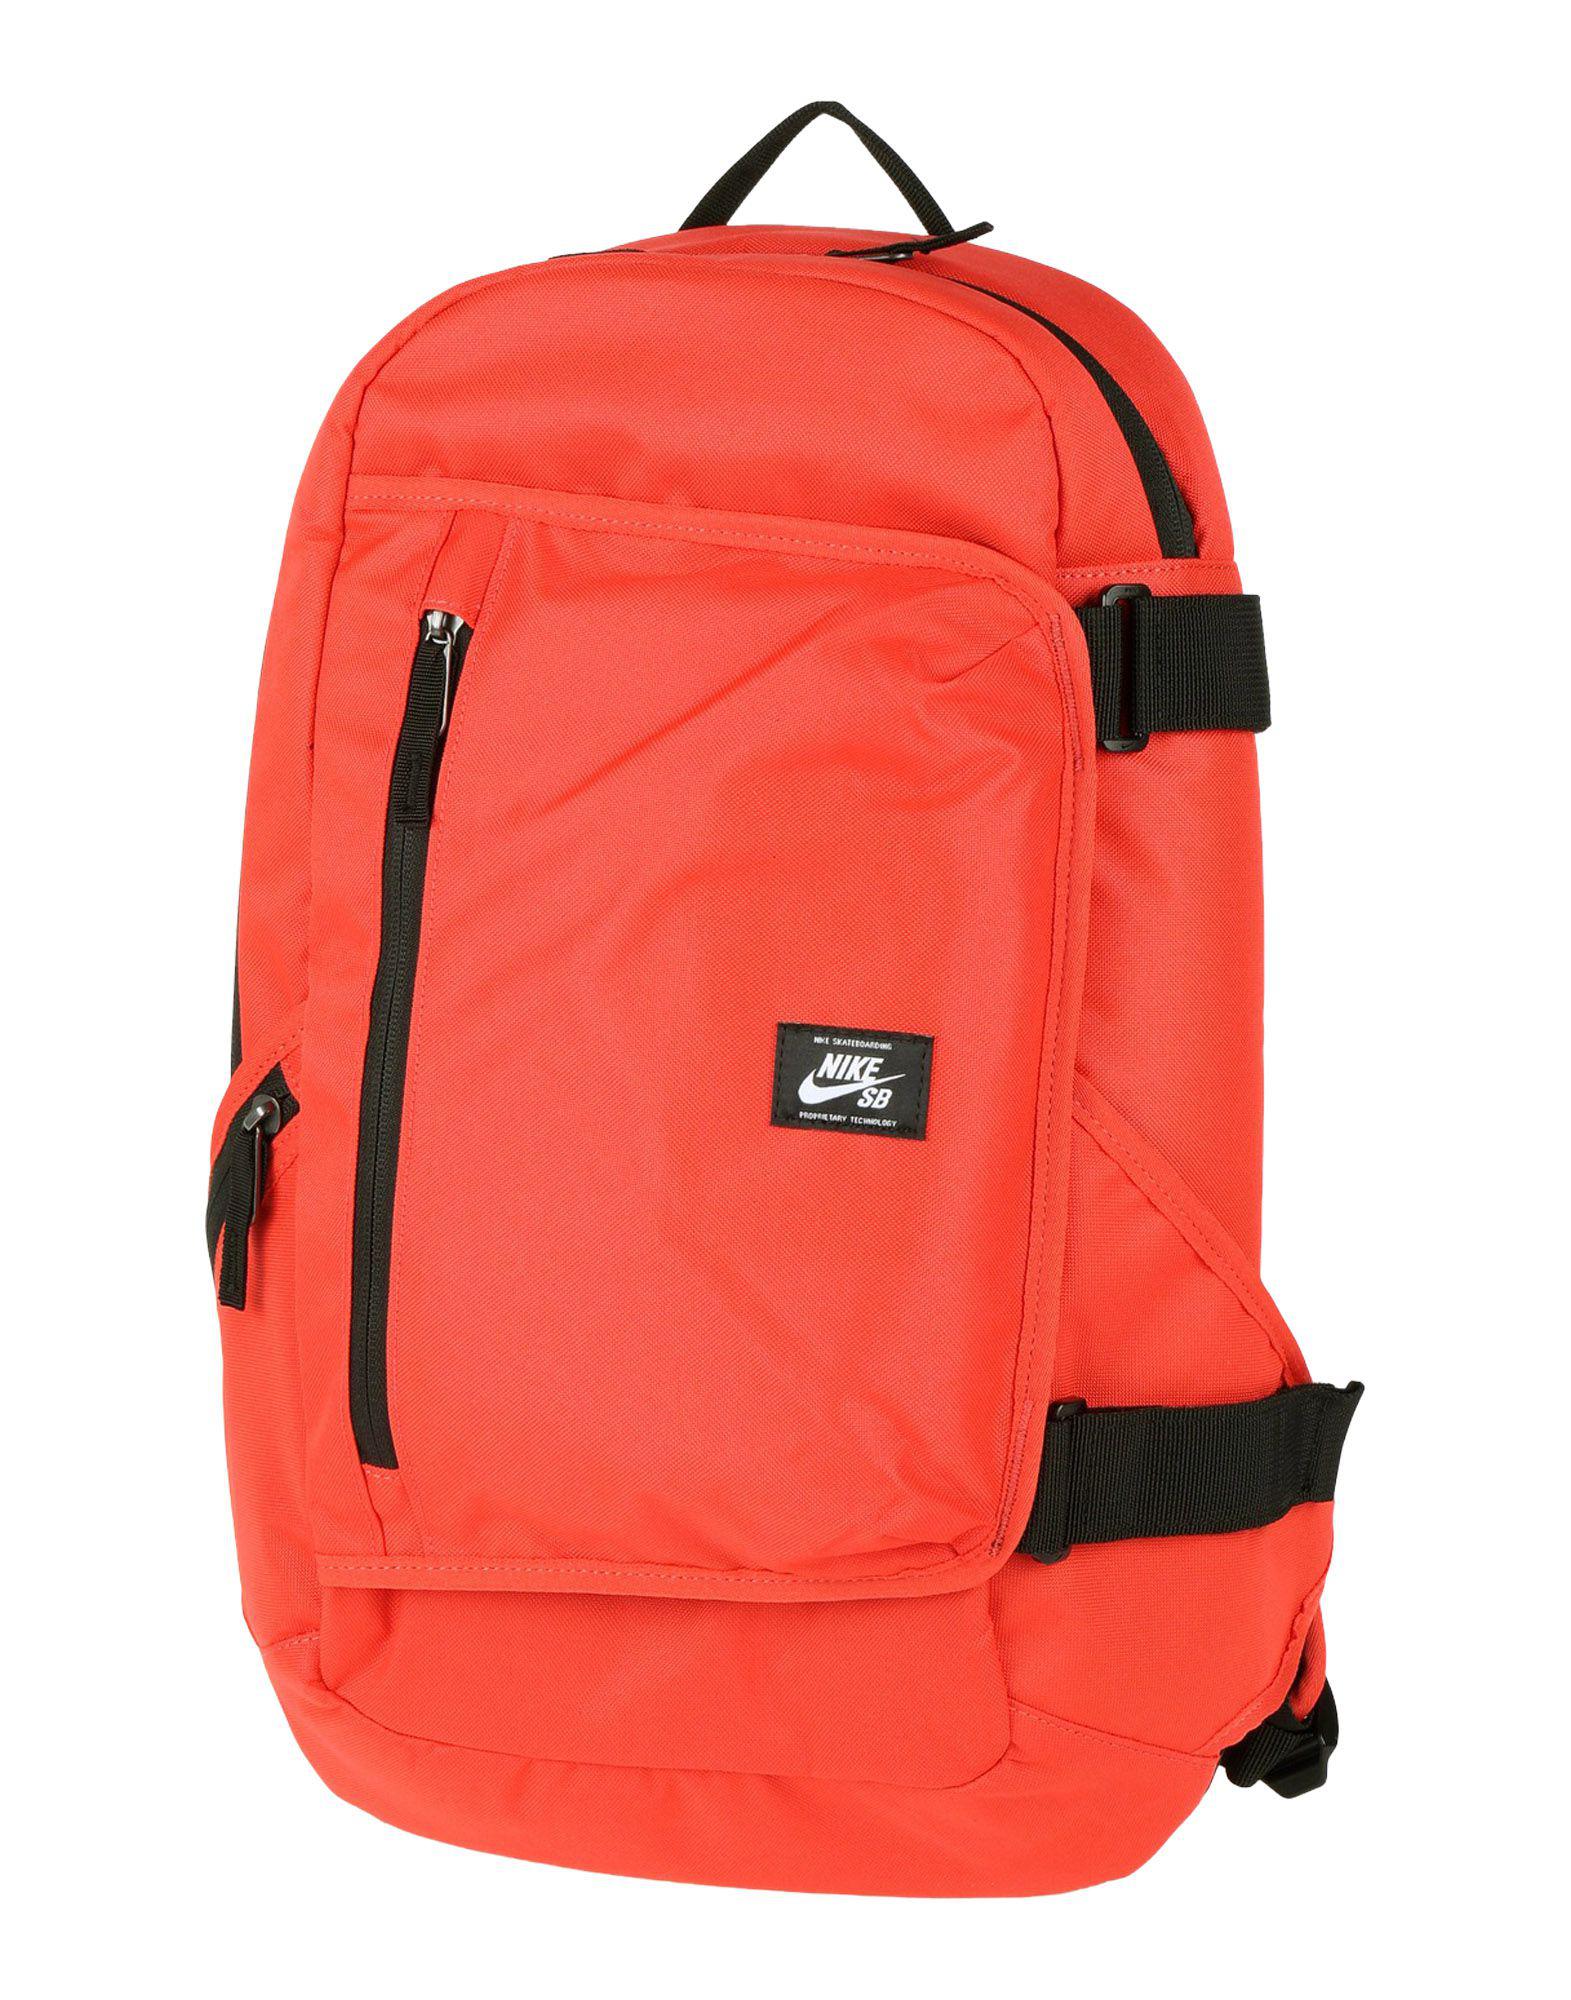 Nike Synthetic Backpacks & Bum Bags in Red for Men - Lyst